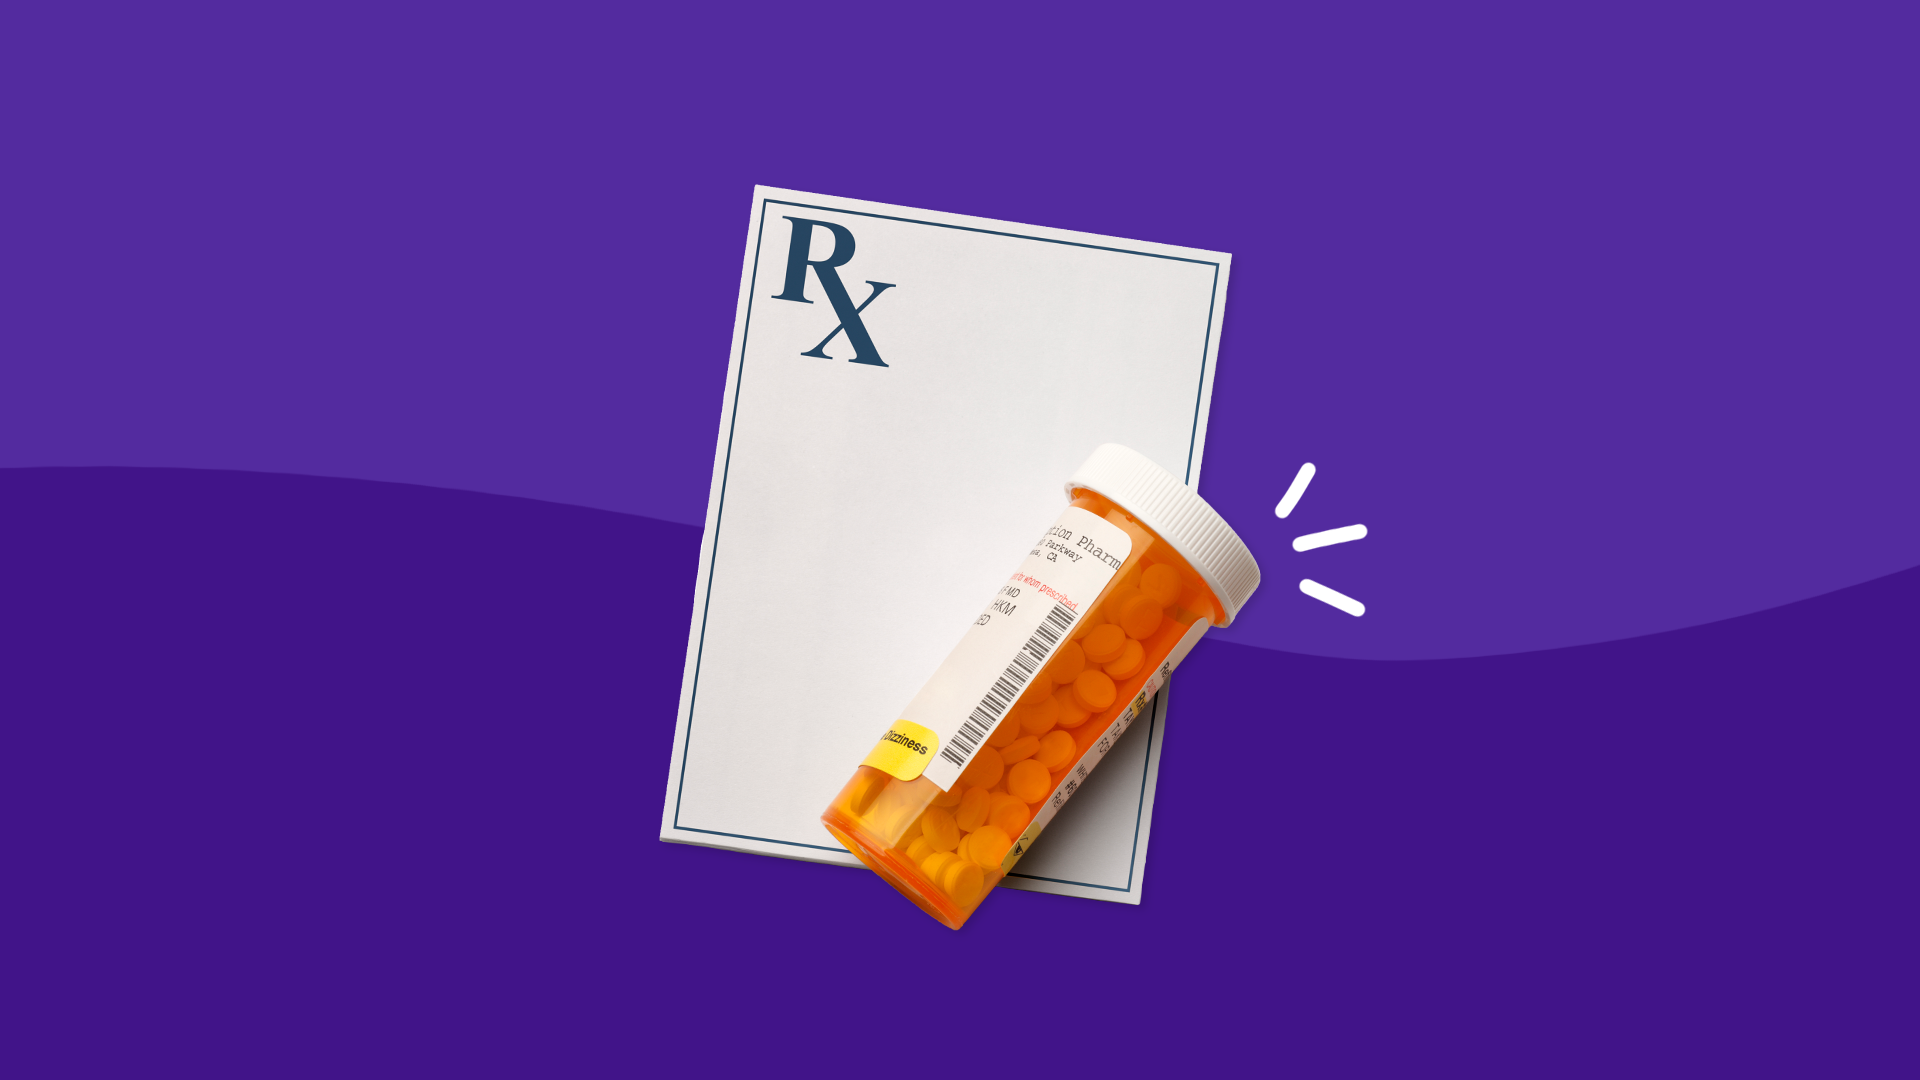 Rx pad with bottle: Xeljanz side effects and how to avoid them